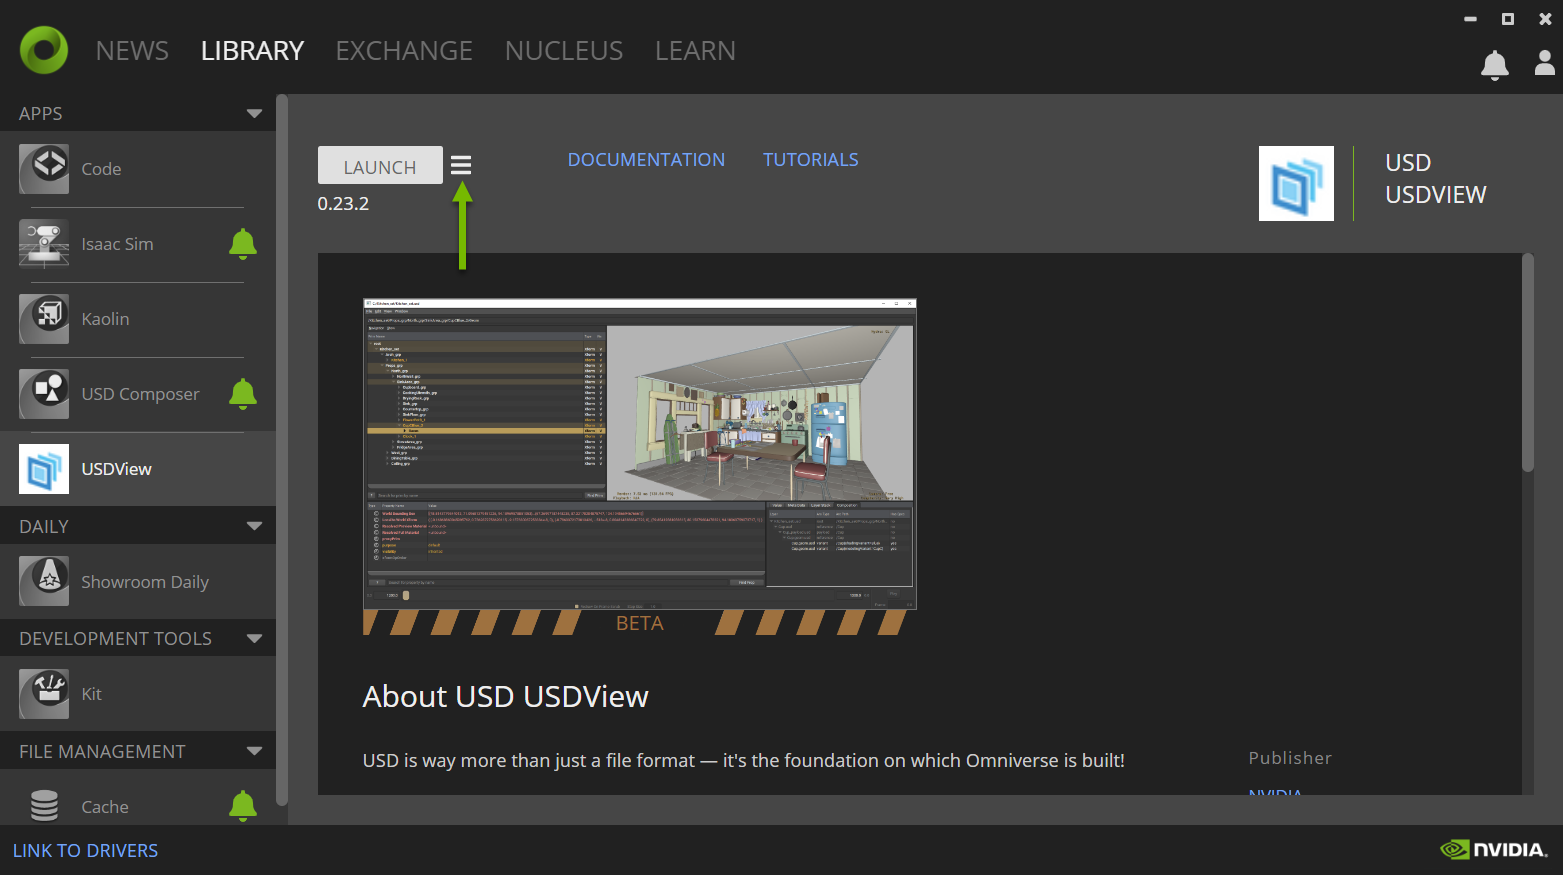 USDView Settings in the Omniverse Launcher